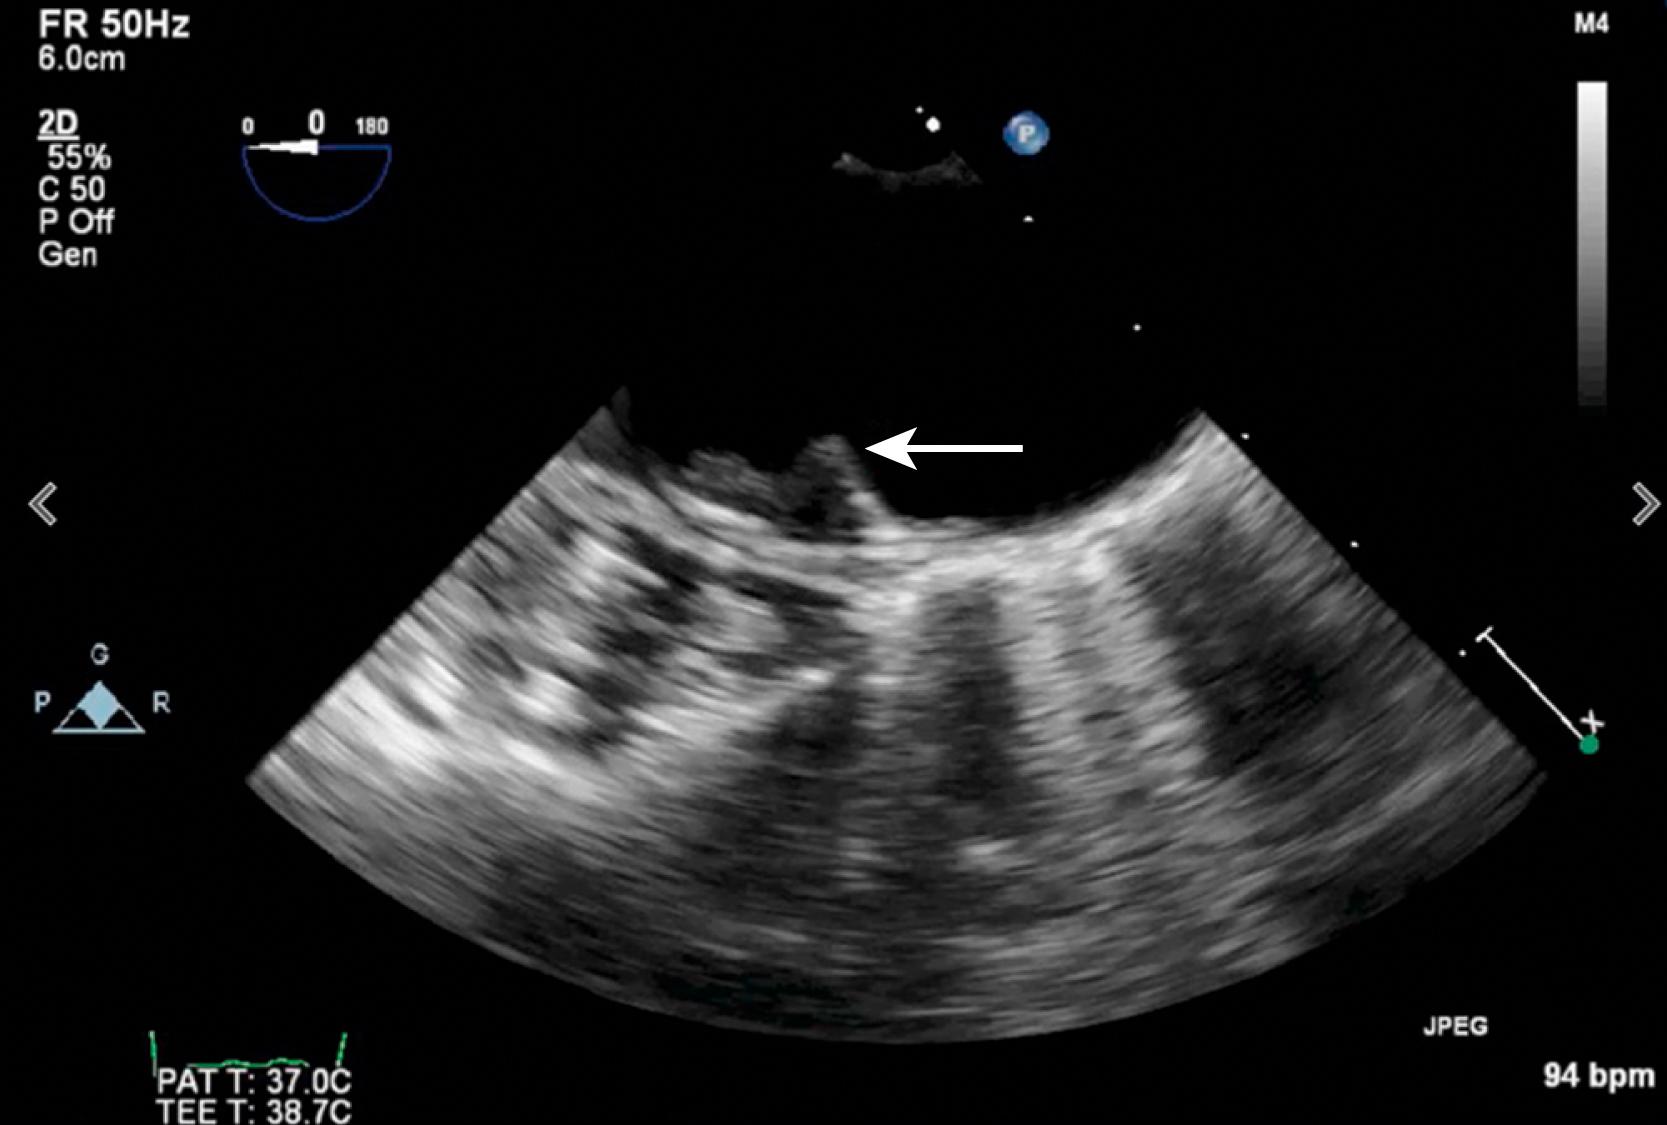 Fig. 32.1, Complex aortic atheroma. A transesophageal echocardiogram showing a sessile plaque protruding from the lesser curvature of the aortic arch into the lumen of the aorta, consistent with complex aortic atheromatous disease.